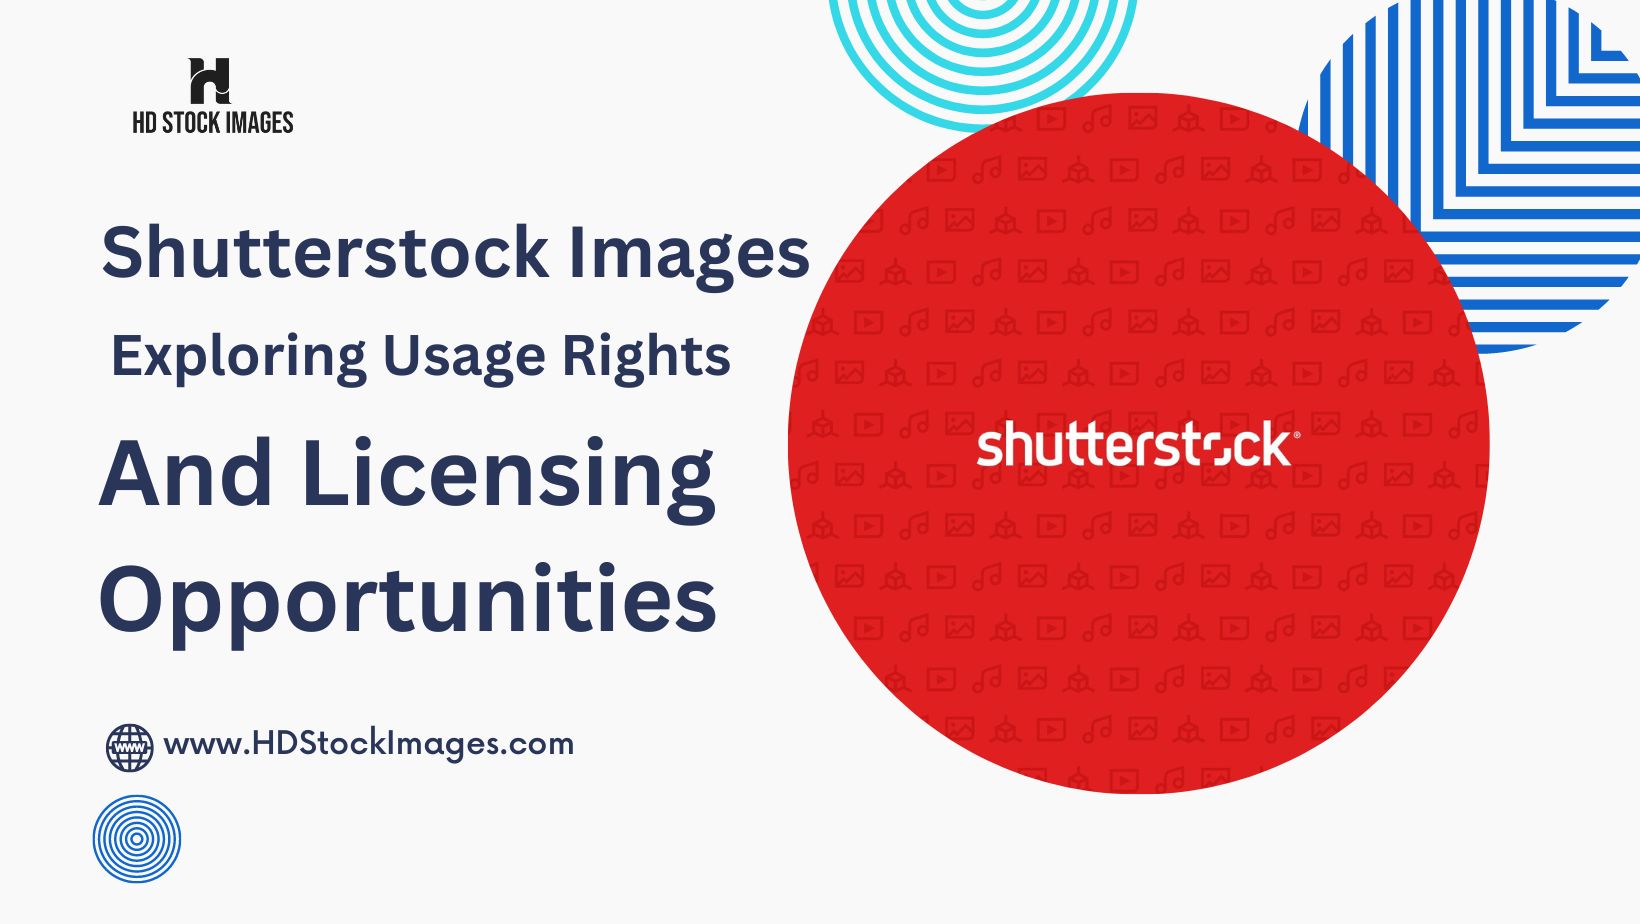 an image of Print on Demand and Shutterstock Images: Exploring Usage Rights and Licensing Opportunities